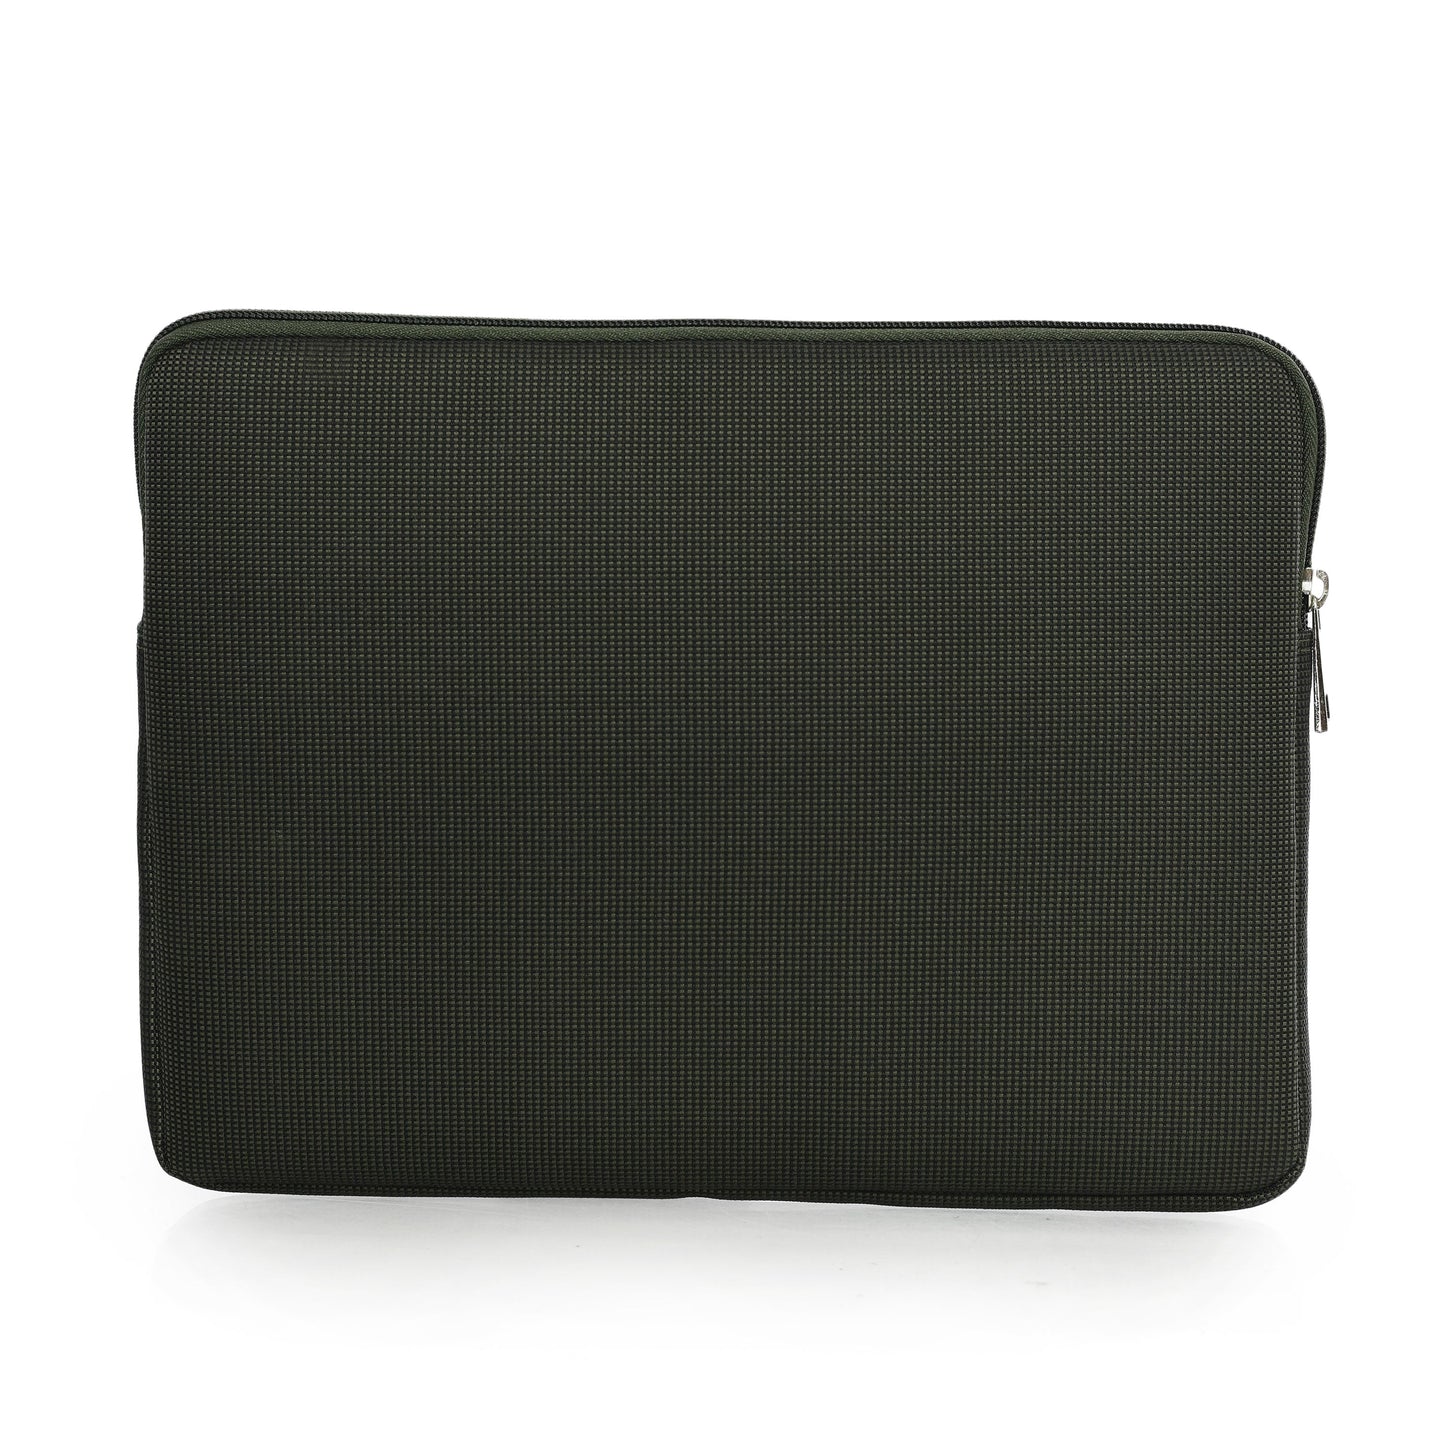 vaku-luxos®-salero-mini-pouch-for-ipad-air-pro-compatible-with-10-2-to-11-green8905129019310